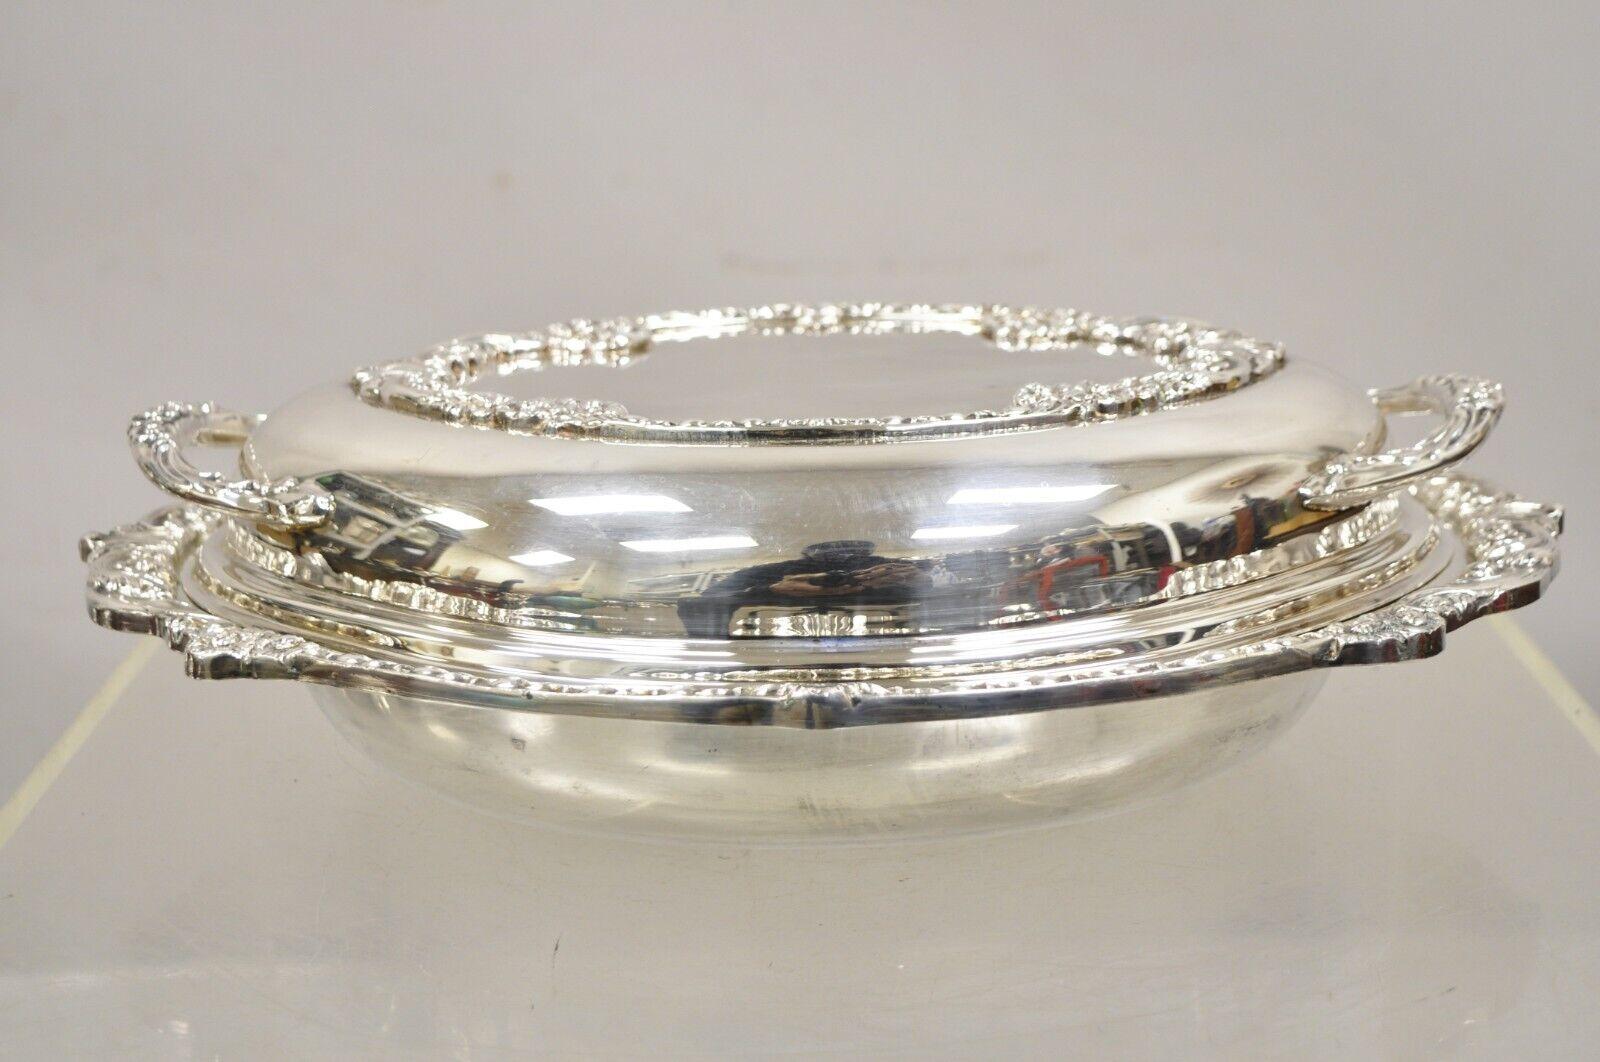 Vintage Sheridan English Regency Lidded Silver Plated Vegetable Casserole Dish. Item featured includes glass liner with divider by Glass bake. Circa Mid 20th Century. Measurements:  4